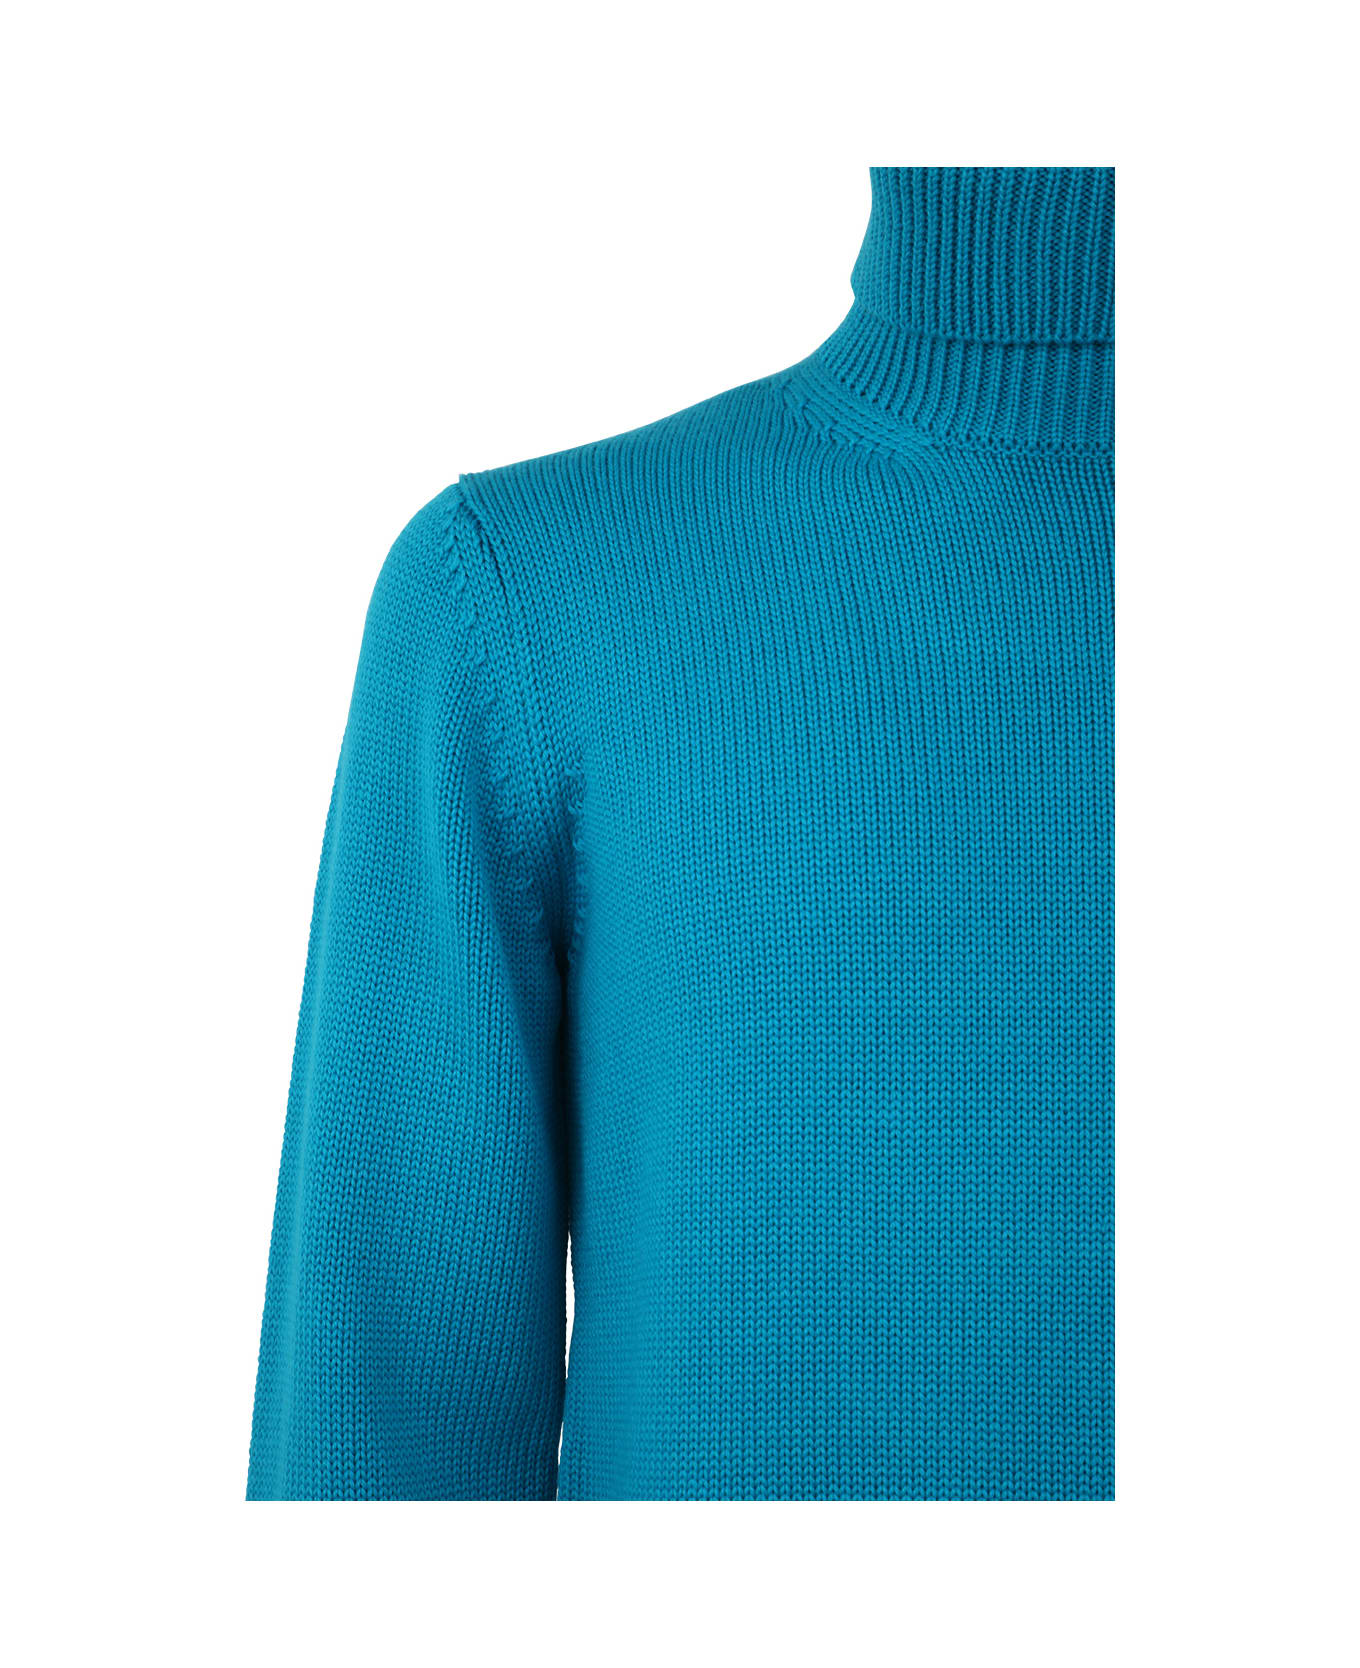 Nuur Long Sleeve Turtle Neck Sweater - Turquoise